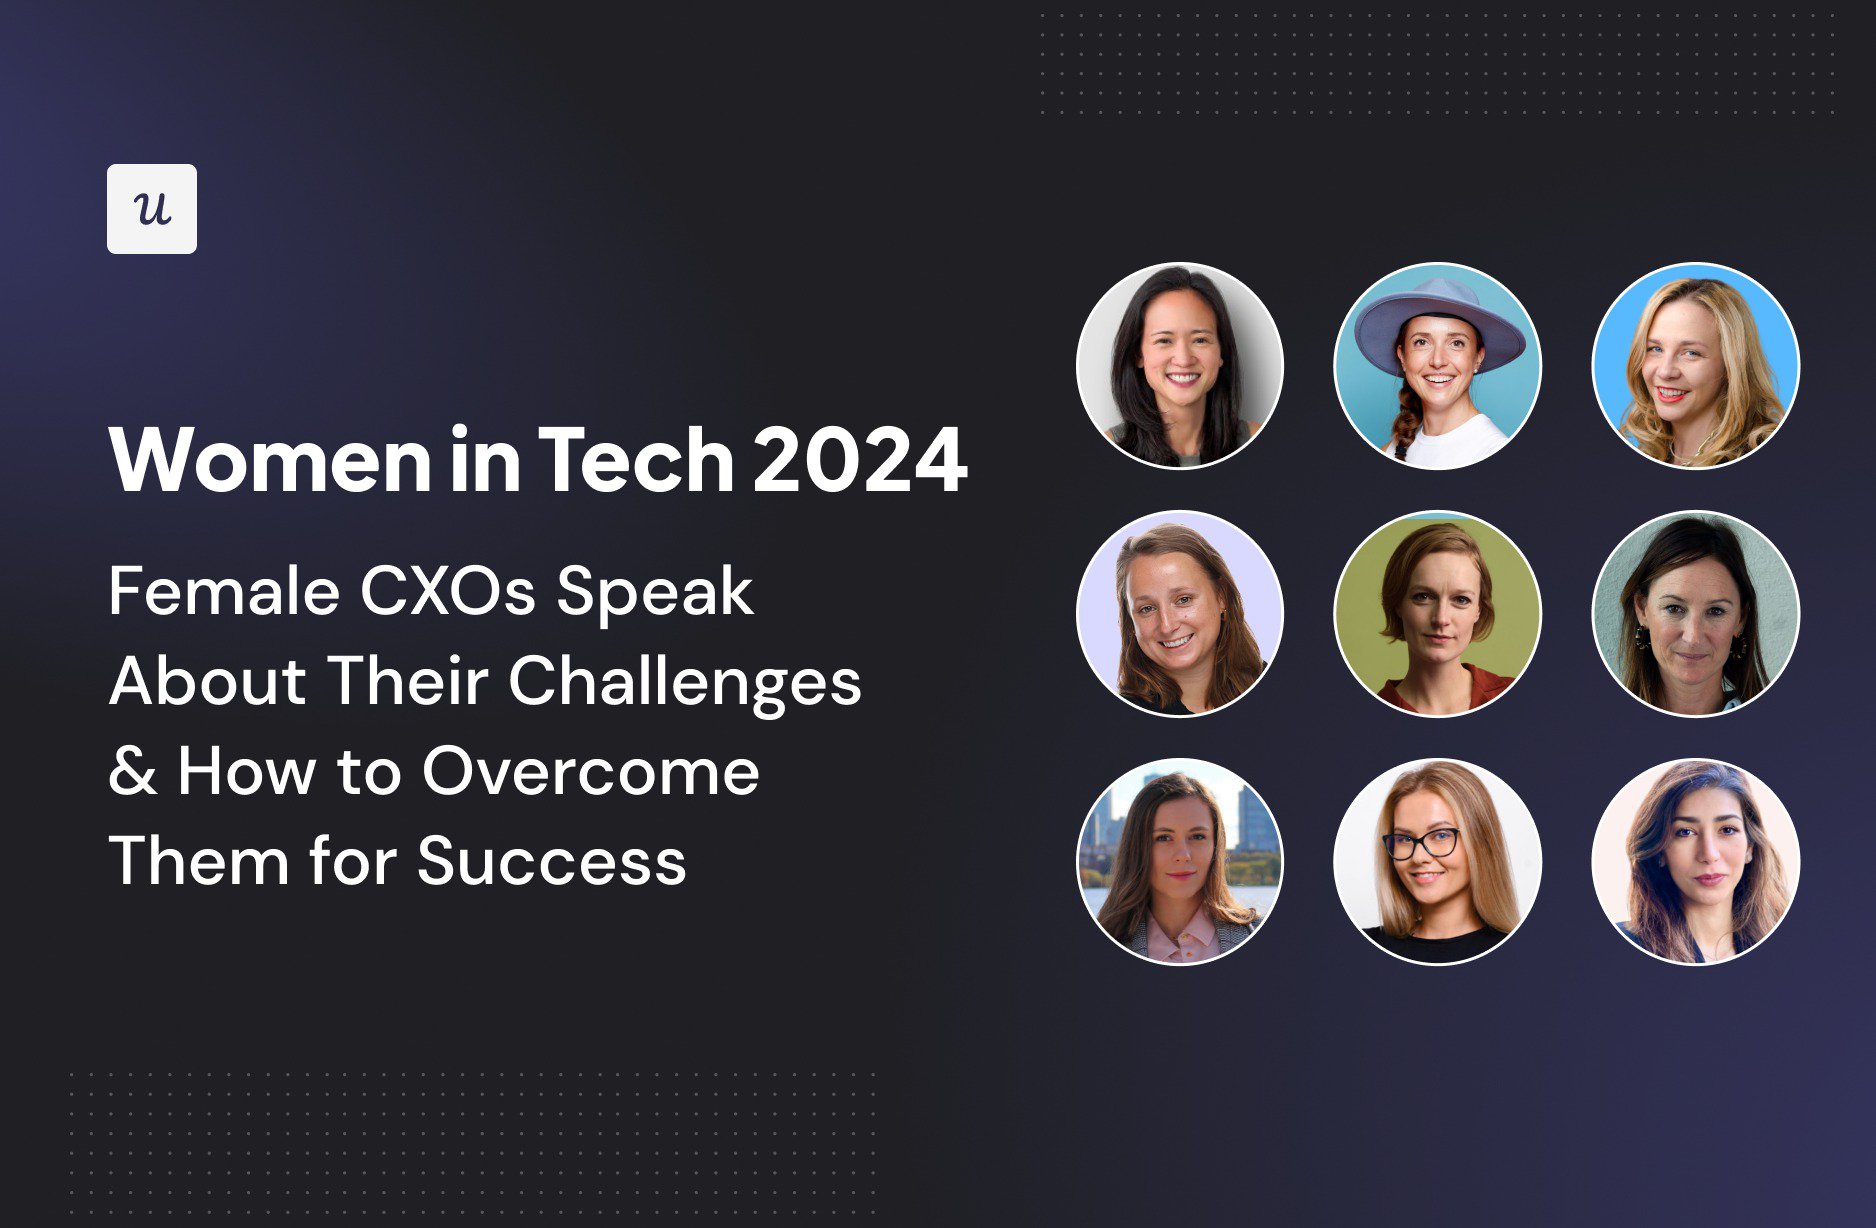 Women in Tech - 10 Female CXOs Share their Challenges in Tech Startups - with Melissa Kwan, Alice de Courcy, Maja Voje, Laura Erdem & others cover